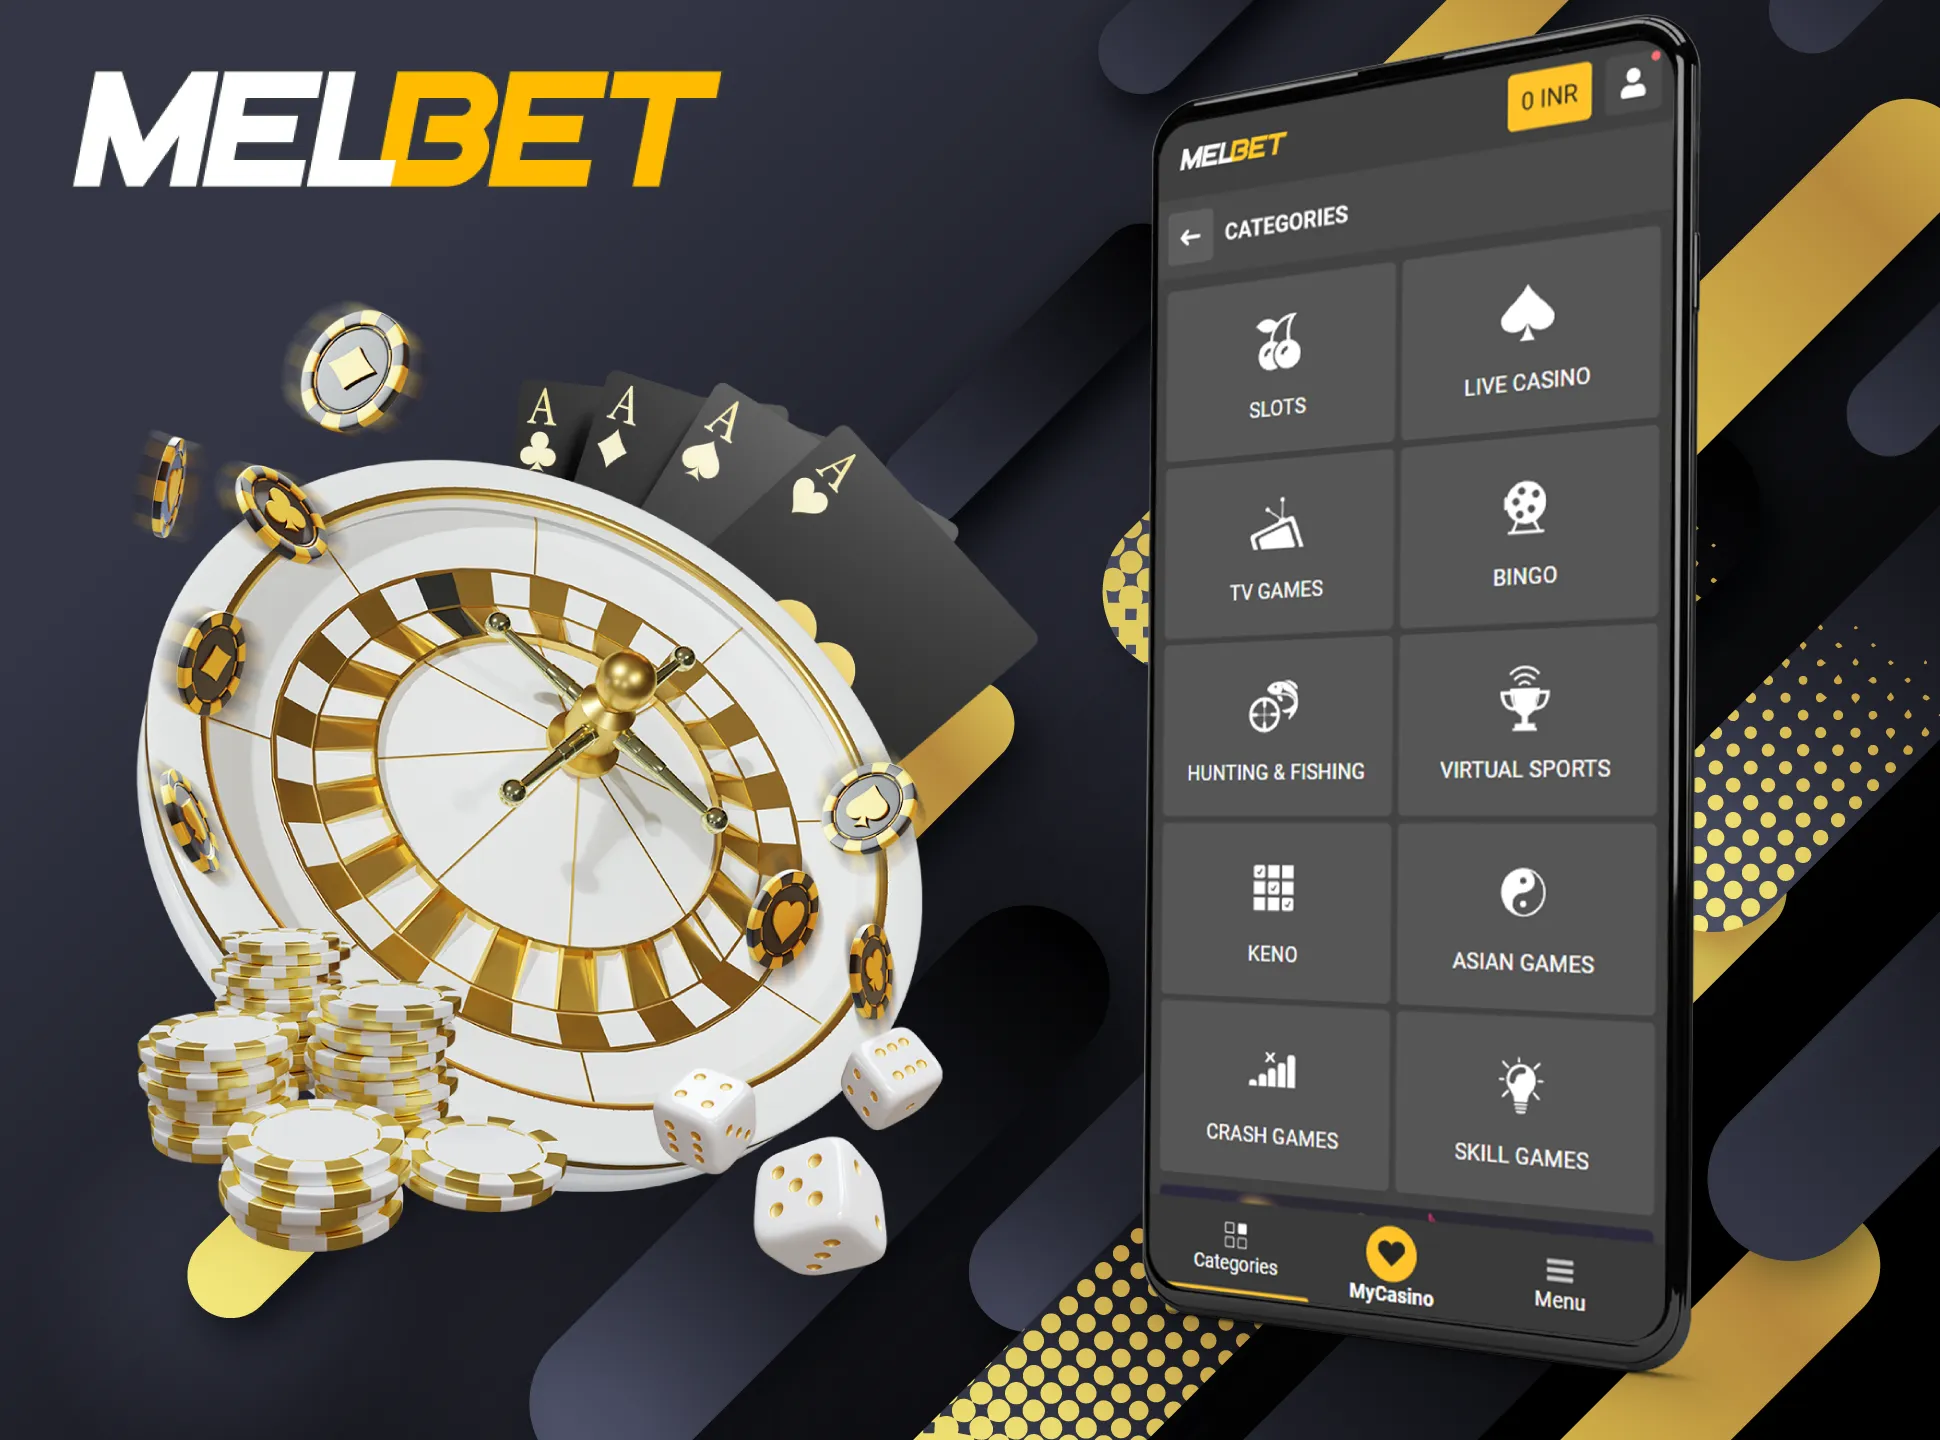 Melbet offers lots of casino games from various providers.